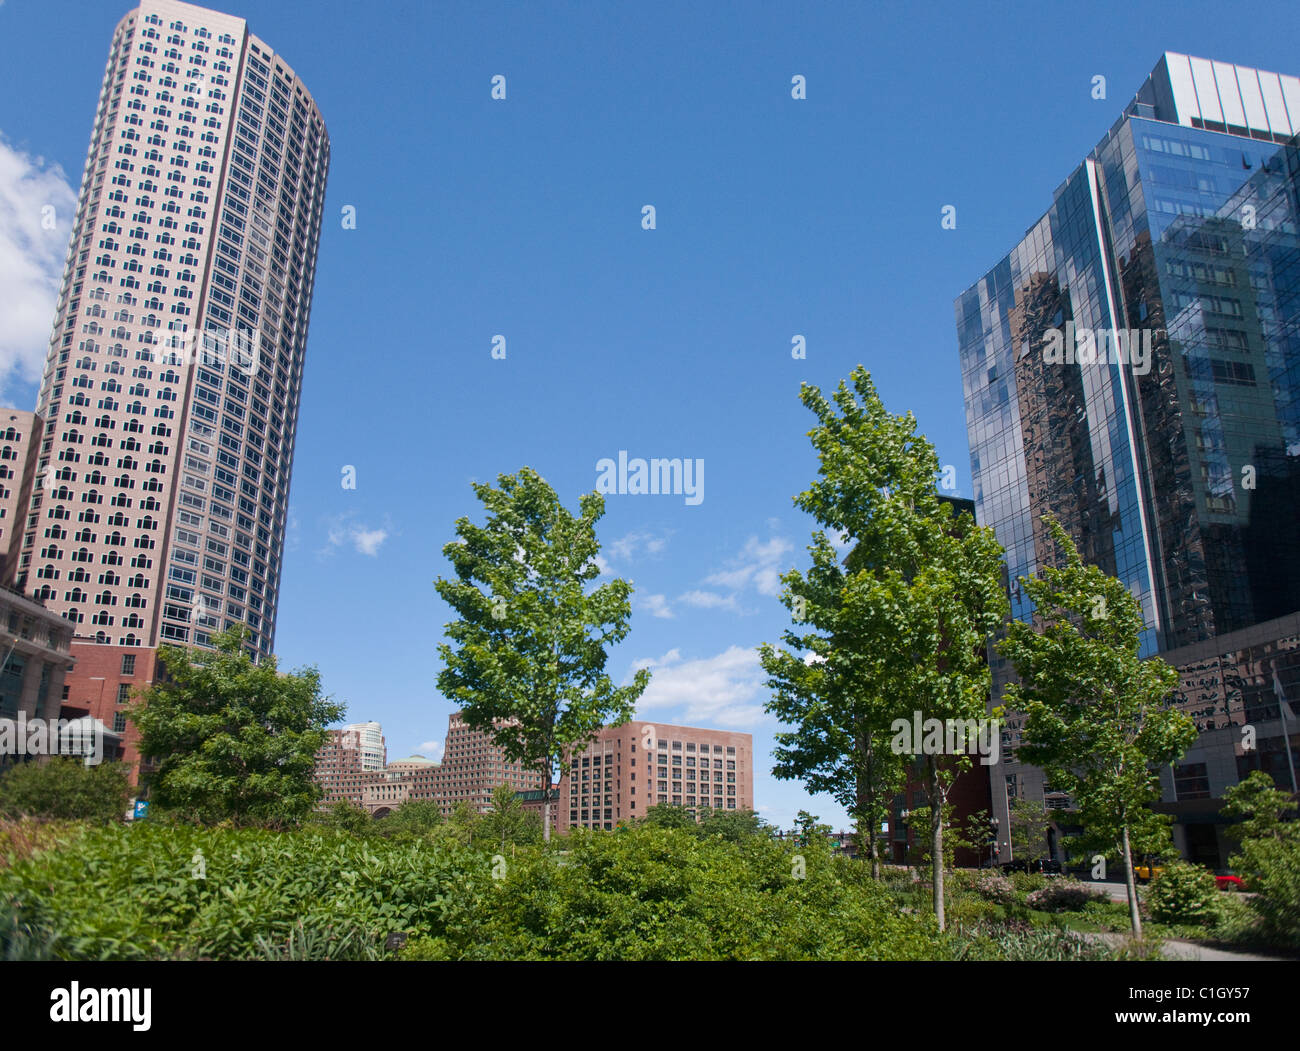 Low angle view of buildings in a city, Boston, Massachusetts, USA Stock Photo